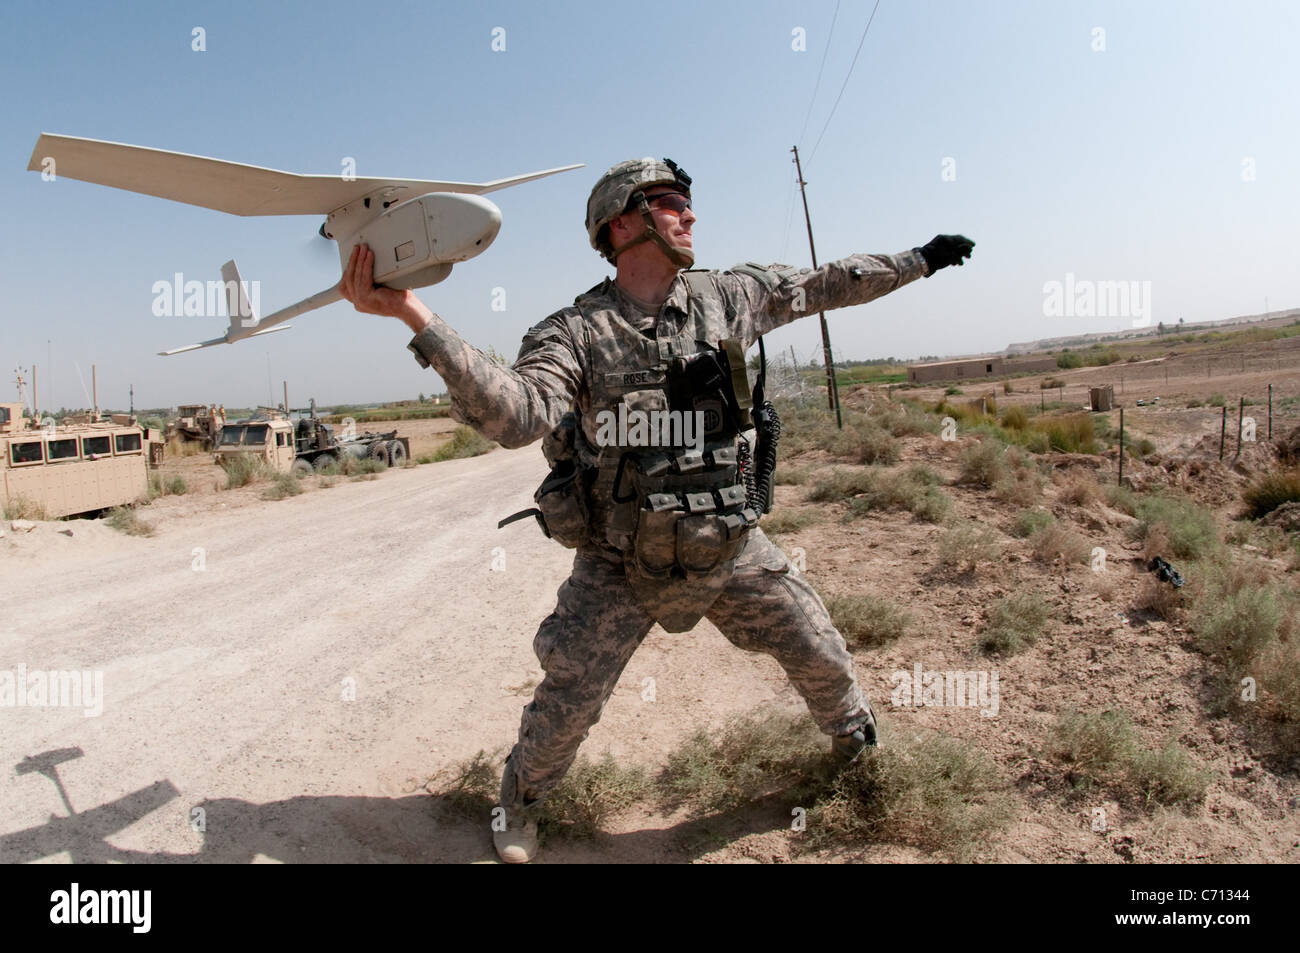 U.S. Army 1st Lt. Steven Rose launches an RQ-11 Raven unmanned aerial vehicle near a new highway bridge project along the Euphrates River north of Al Taqqadum, Iraq, on Oct. 9, 2009. Rose is assigned to Charlie Company, 1st Battalion, 504th Parachute Infantry Regiment, 1st Brigade Combat Team, 82nd Airborne Division which is assisting Iraqi police in providing security for the work site. DoD photo by Spc. Michael J. MacLeod, U.S. Army. (Released) Stock Photo